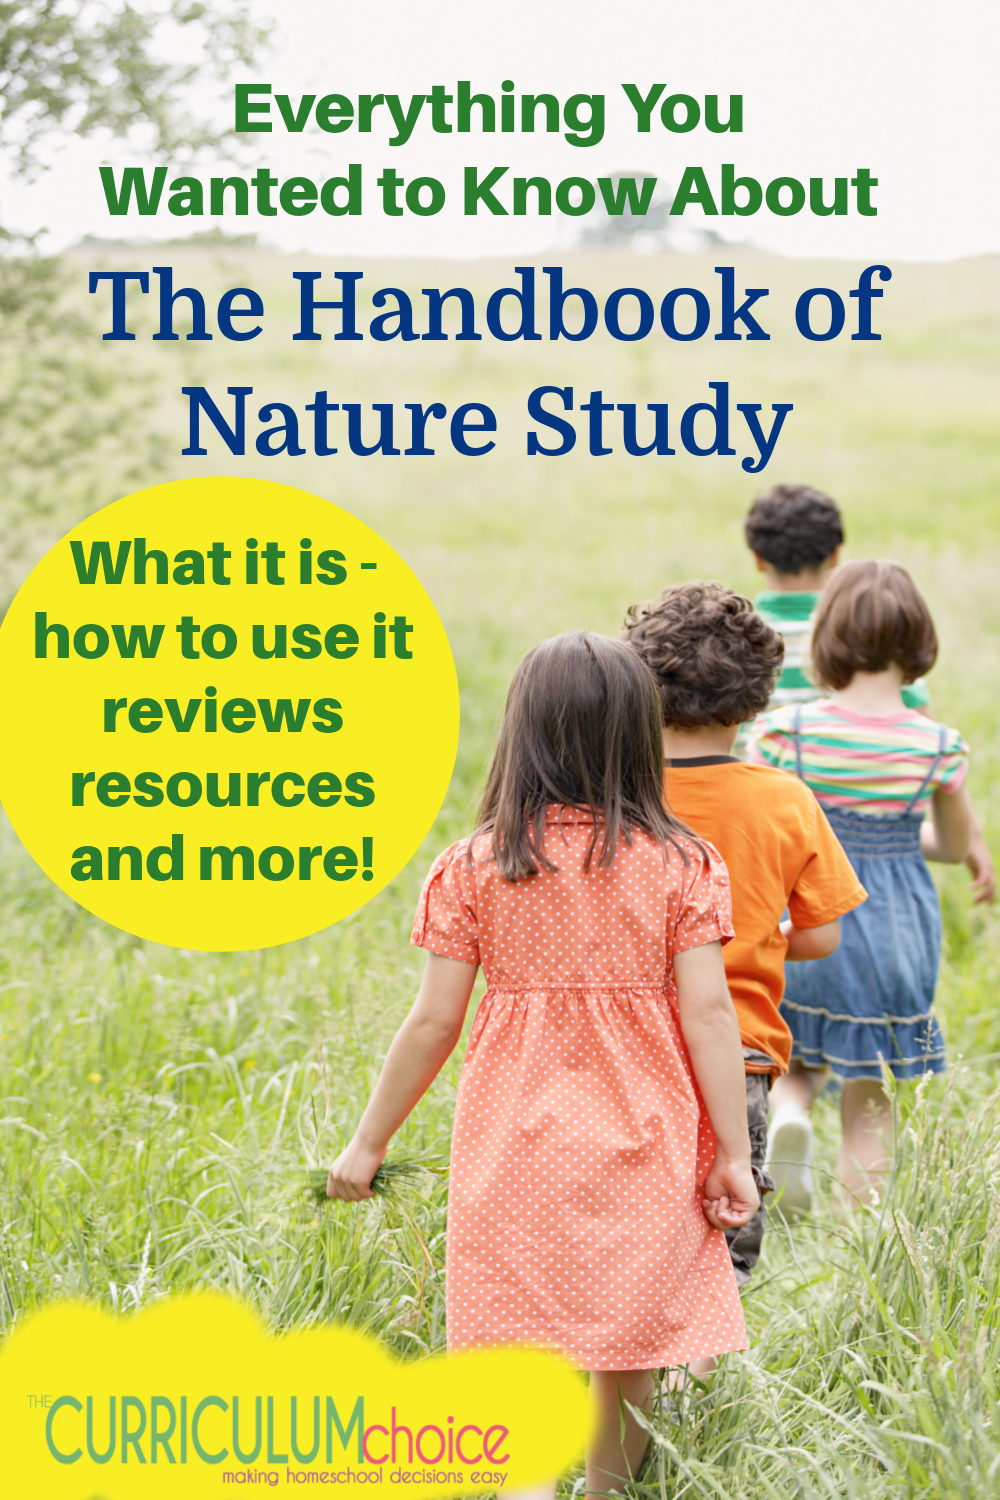 Everything you wanted to know about The Handbook of Nature Study. What it is, how to use it, reviews, resources and more!